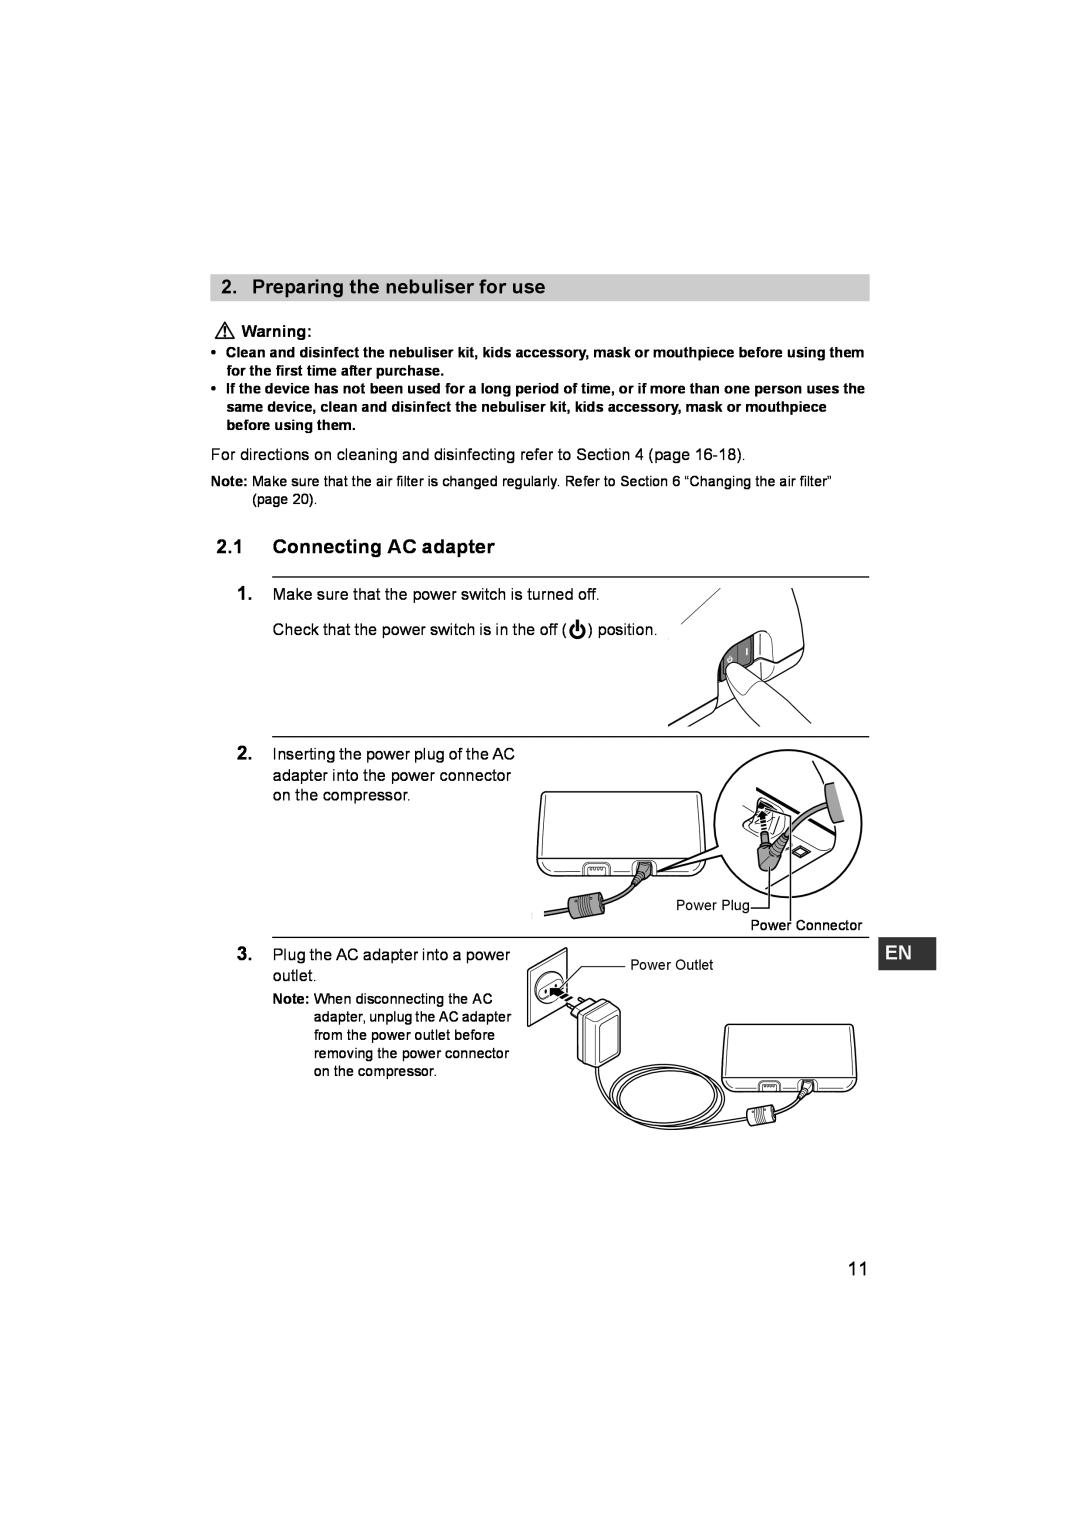 Omron NE- C801KD instruction manual Preparing the nebuliser for use, Connecting AC adapter 